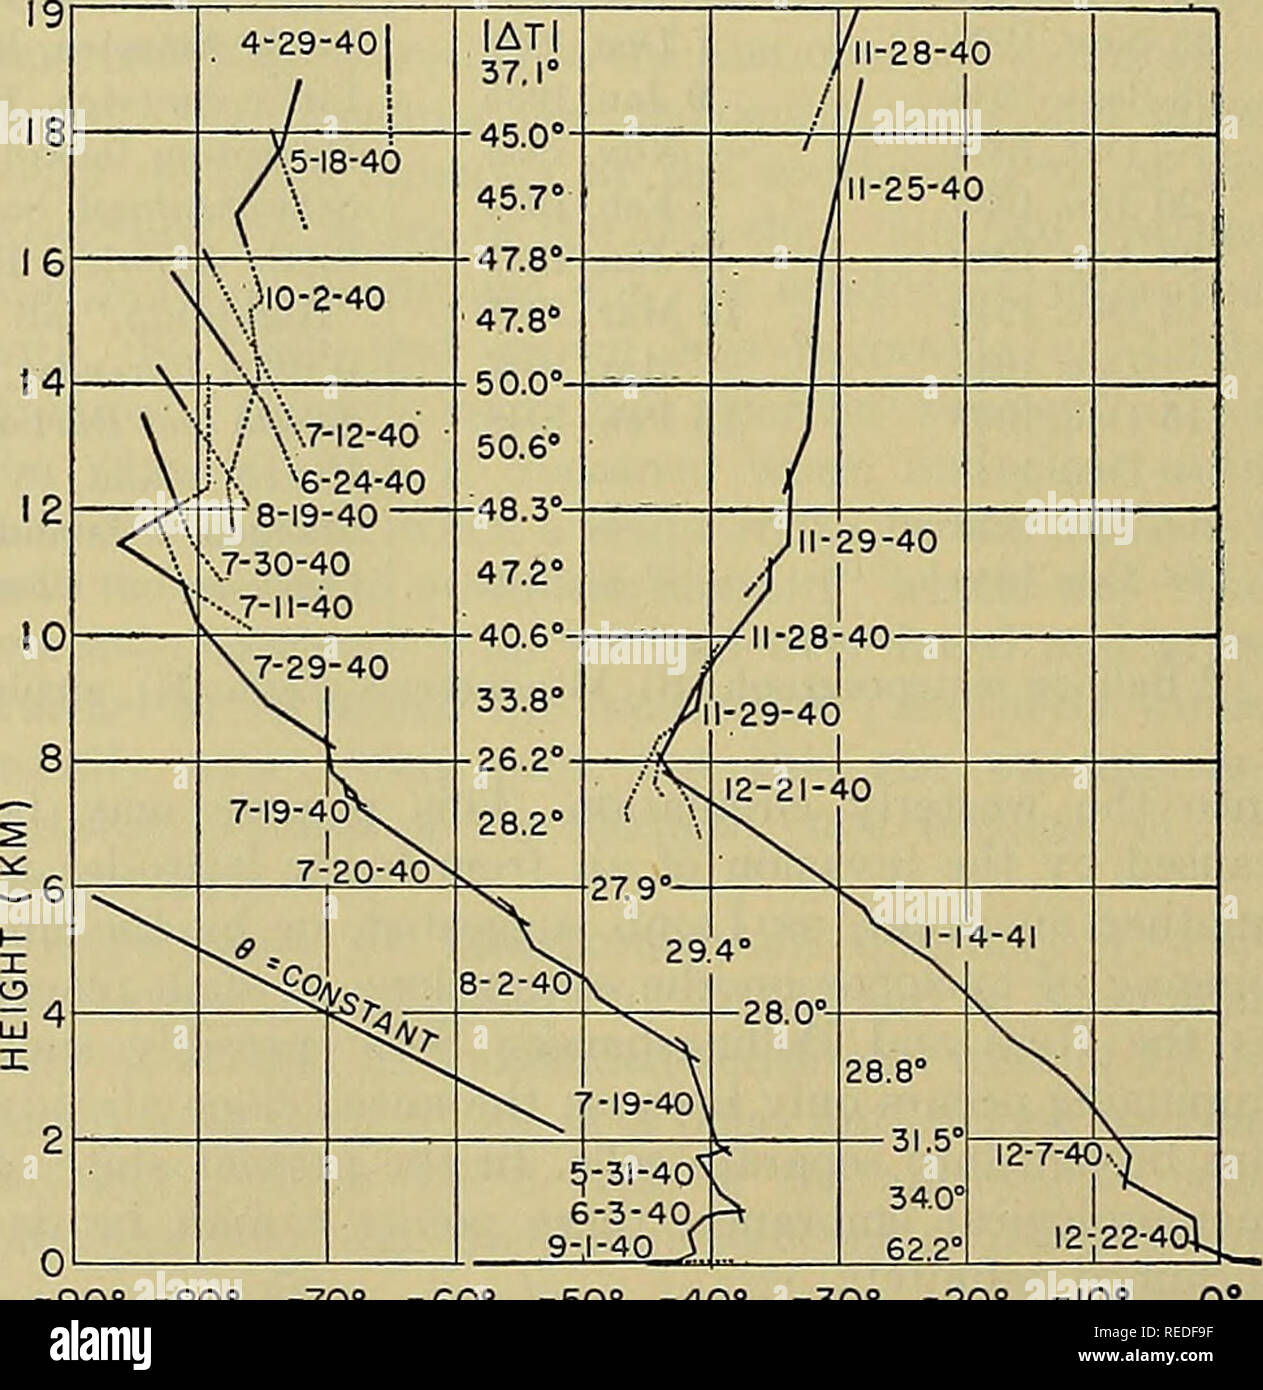 . Compendium of meteorology. Meteorology. -2 Fig. 1.—Antarctic and arctic summertime soundings. Tlie curve for Little America III (78°30'S, 163°50'W) is based on tliirteen soundings during tlie period 1-15 January 1941 [47]. Tlie curve for Operation Higlijump (70°-75°S, 160°W-165°E) is based on tliirty-four soundings from 14 Januarj? to 8 Feb- ruary 1947 [3]. Tlie data for Arctic Bay, Canada (73°16'N, 84°17'W) are from 152 soundings during July, 1943-47 [134]. The tropopause at Arctic Bay was computed separately. Despite these extensive suinmertime soundings, the 1940-41 series provides the on Stock Photo